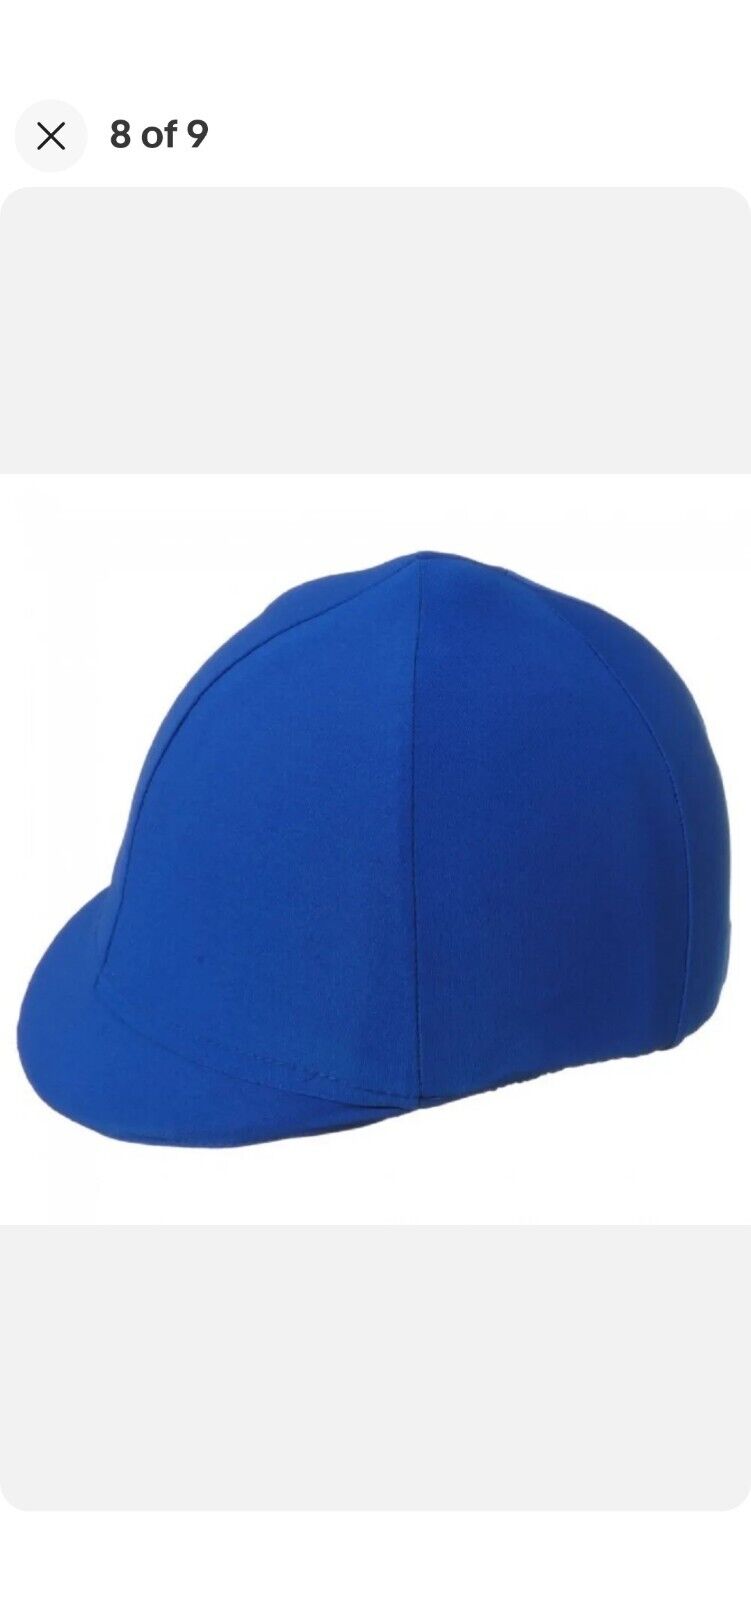 New! Tough-1 Lycra Helmet Cover Cover-up For Horse Riding Helmets Royal Blue 💙